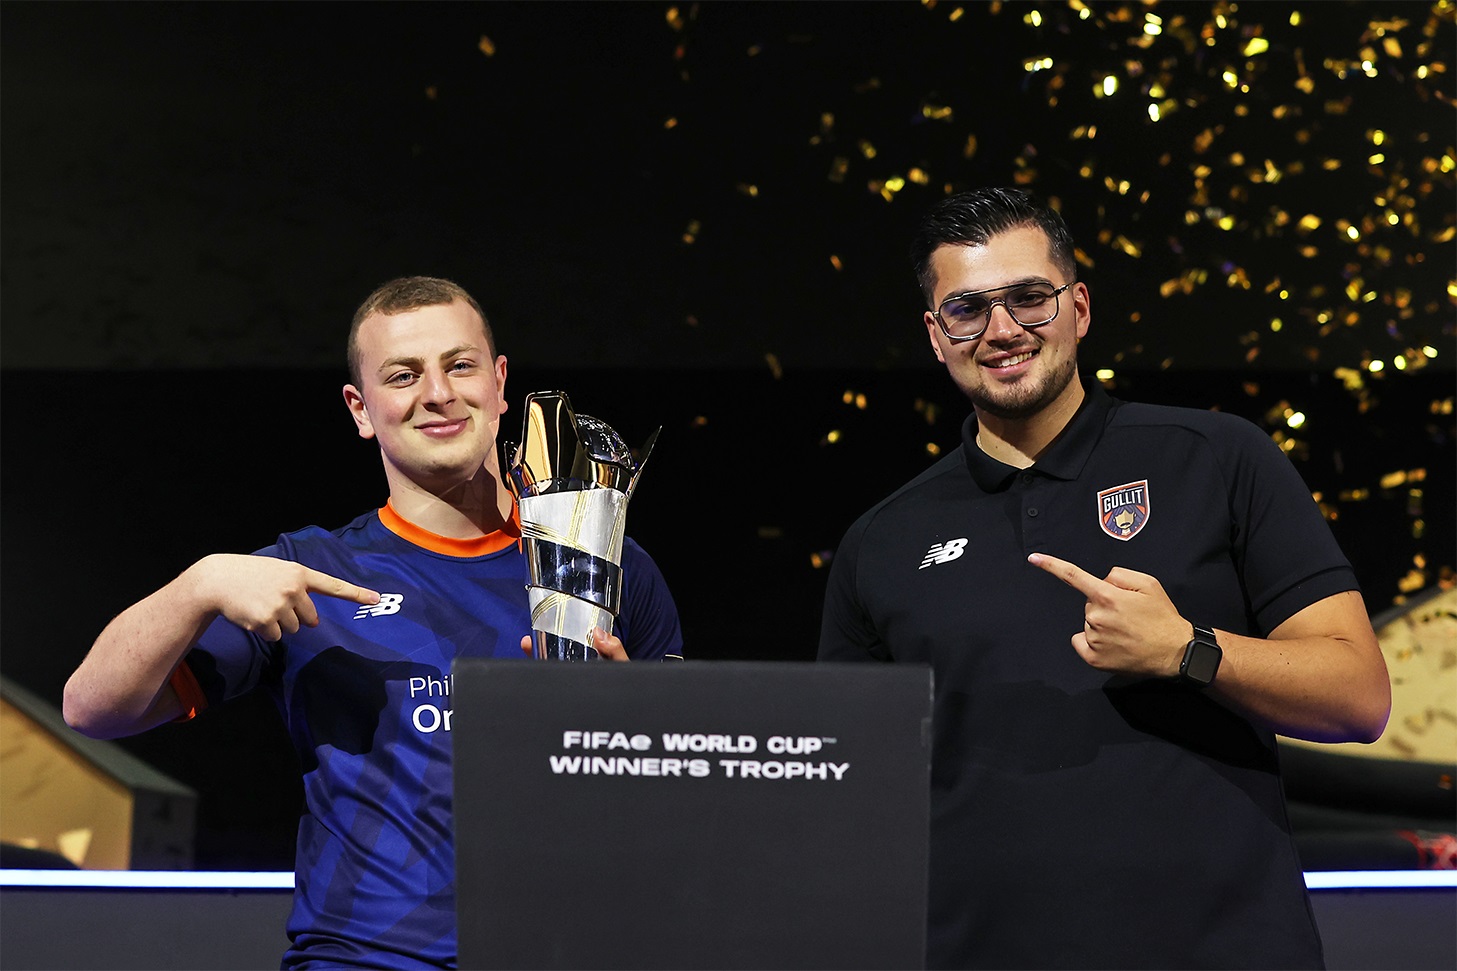 Manuel Bachoore with the FIFAe World Cup trophy, together with Renzo Oemrawsingh.